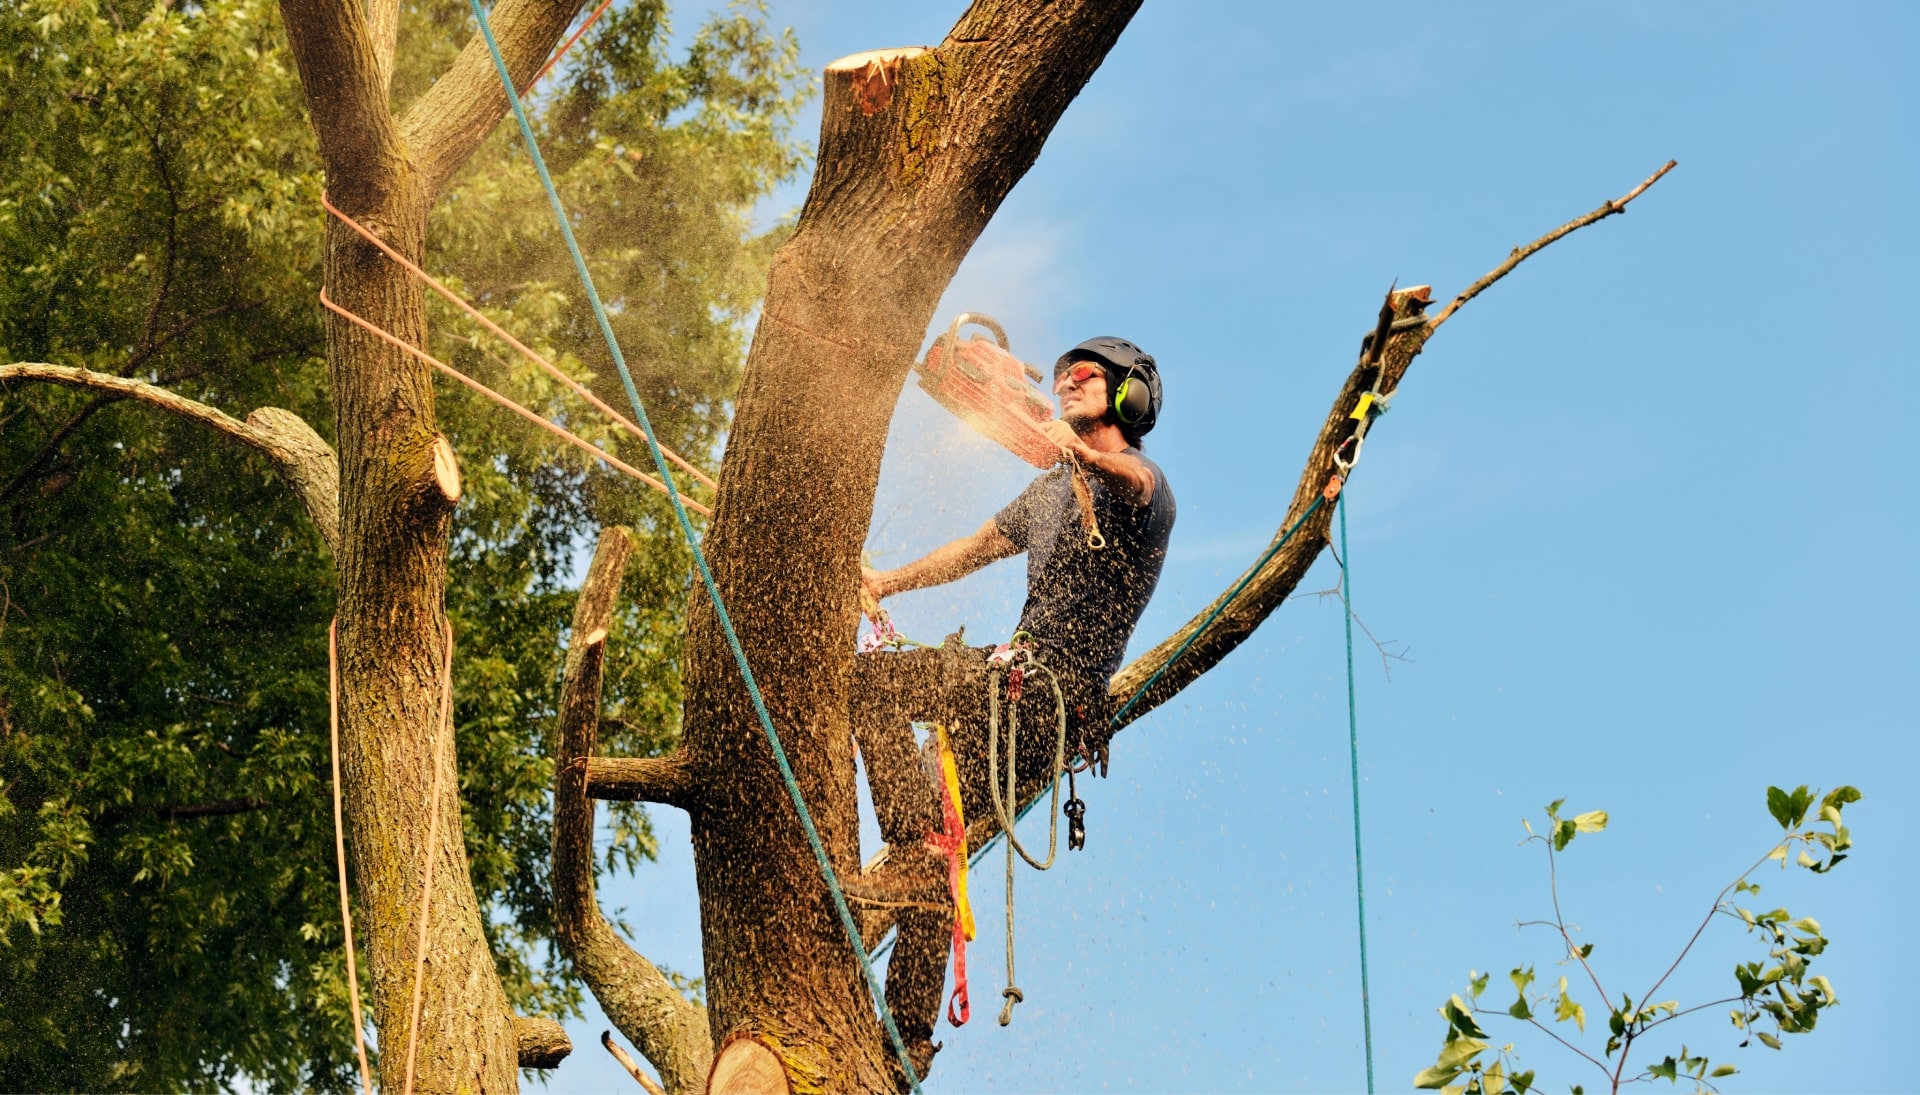 Fayetteville tree removal experts solve tree issues.